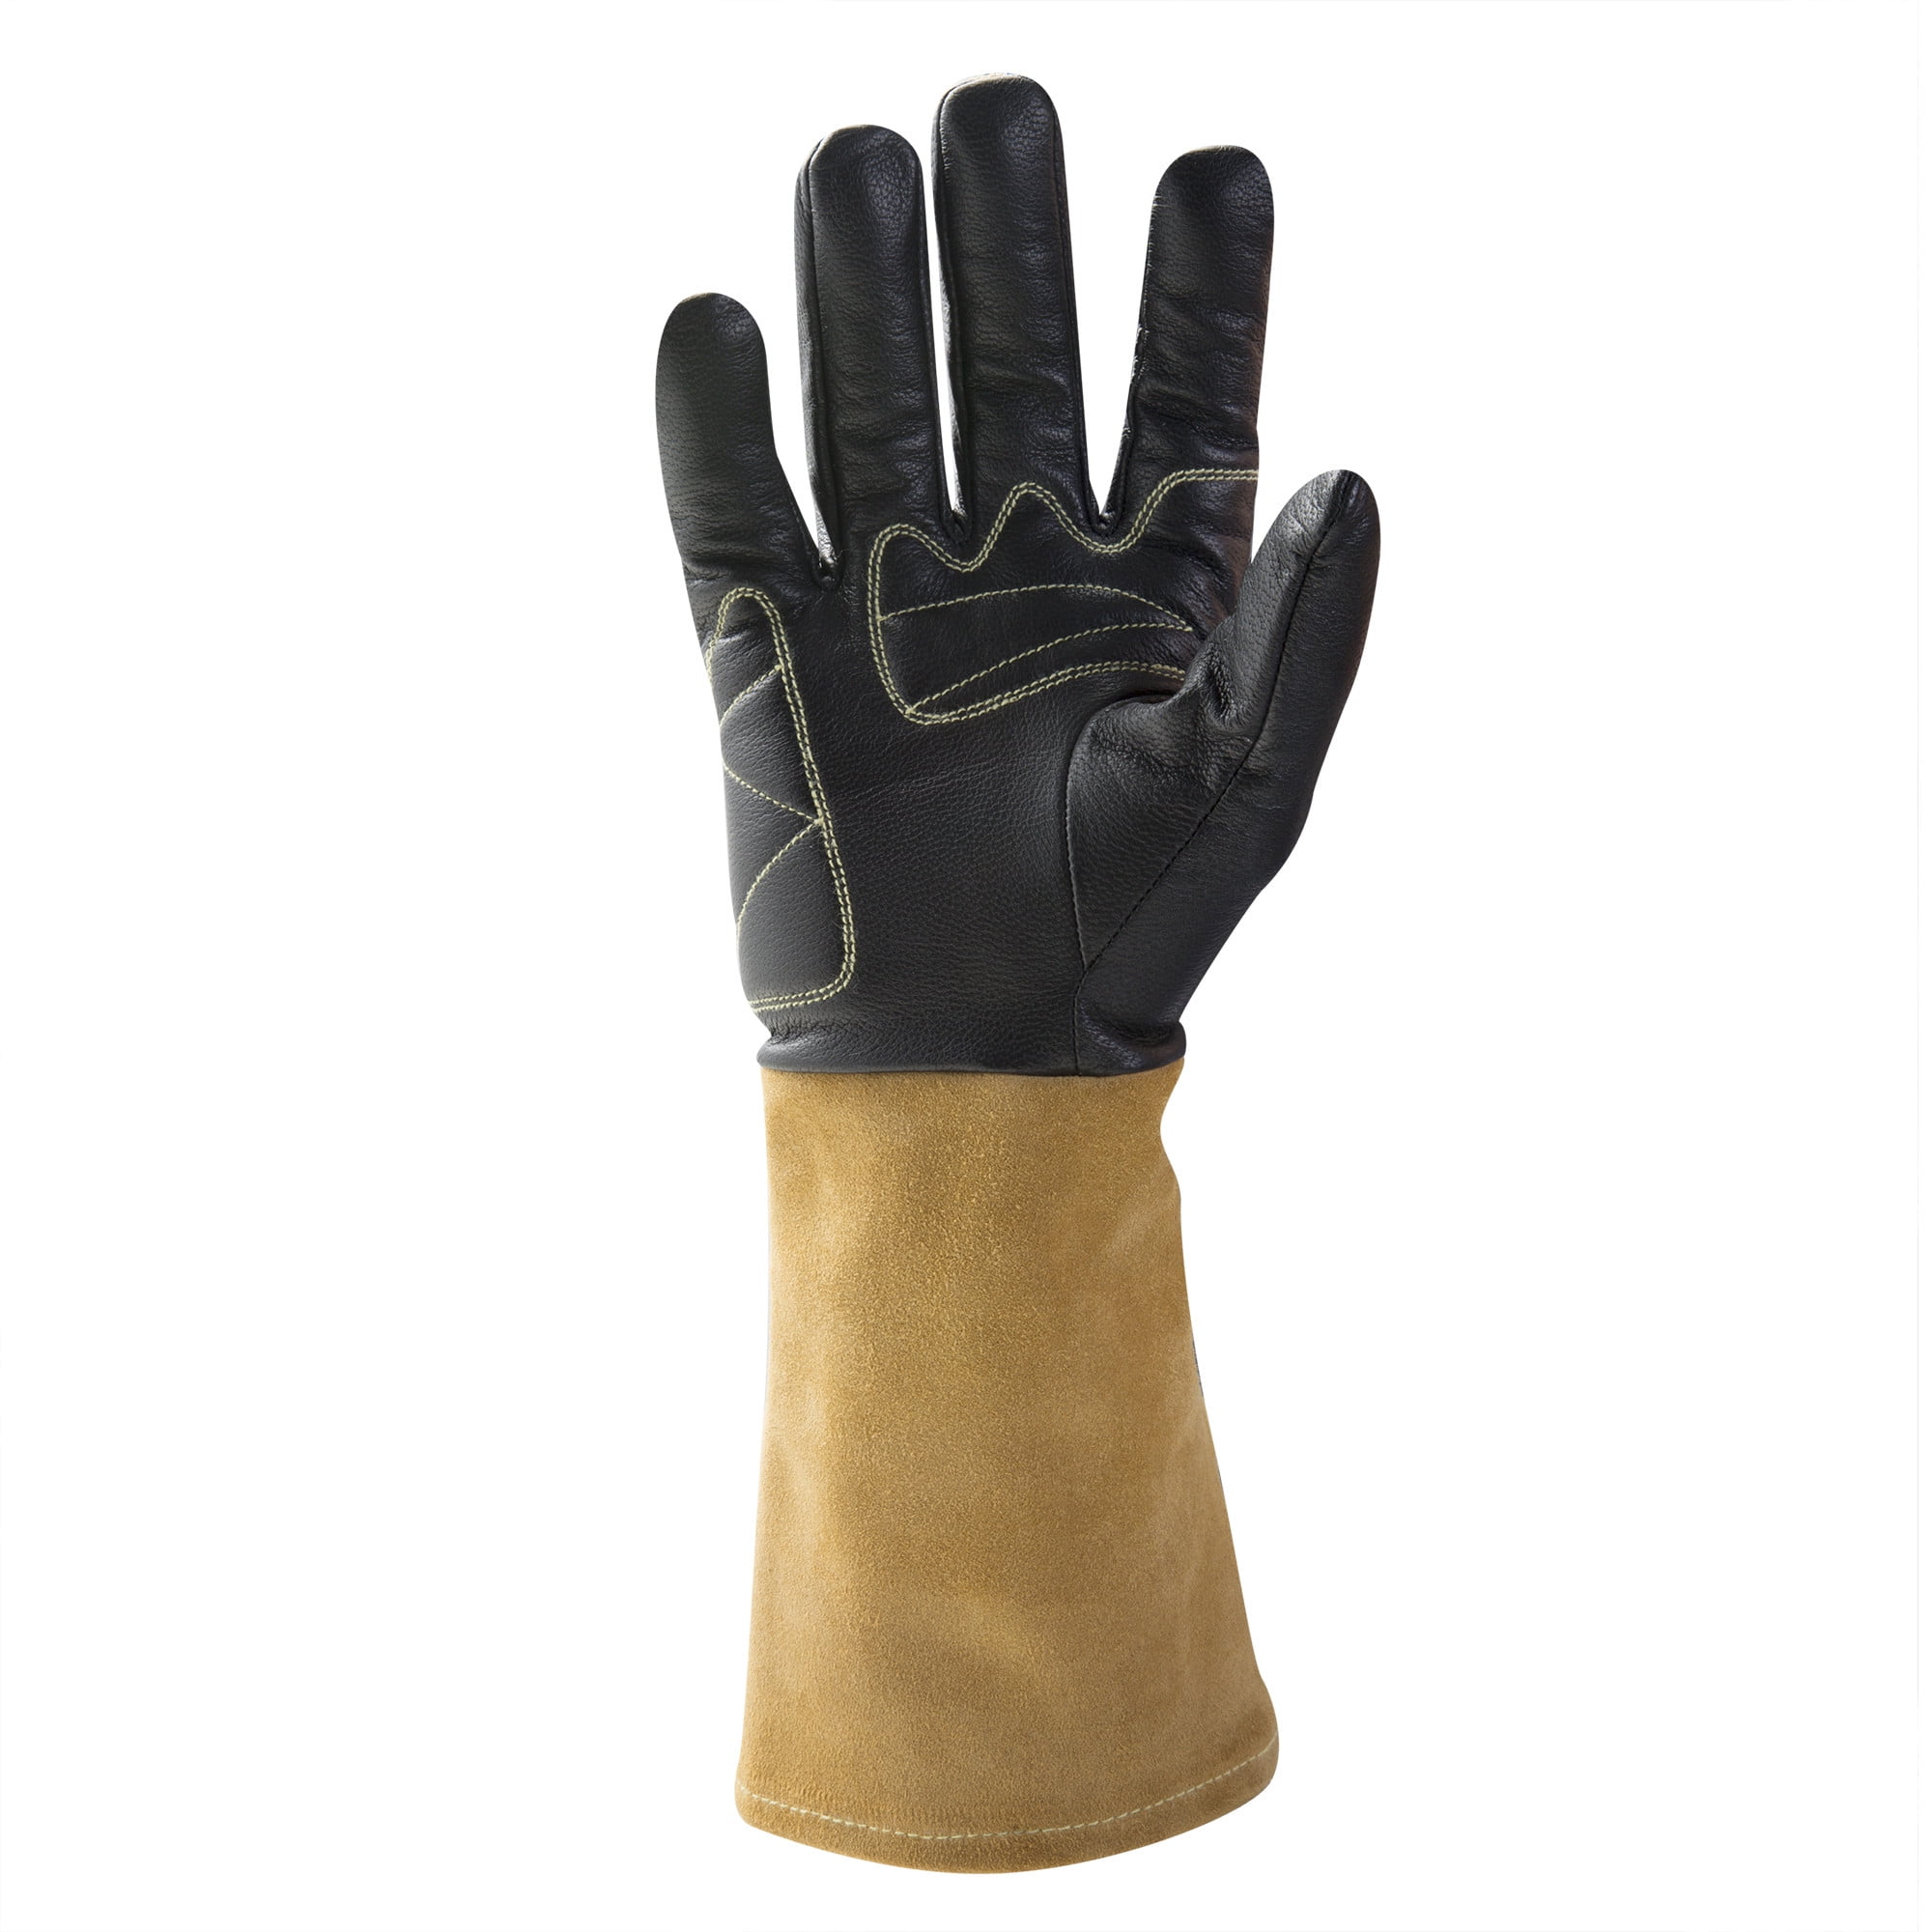 Kole Imports AB228-12 GRX Professional Series 453 Dotted Breathable Nitrile  Work Gloves, Black - Medium - Pack of 12